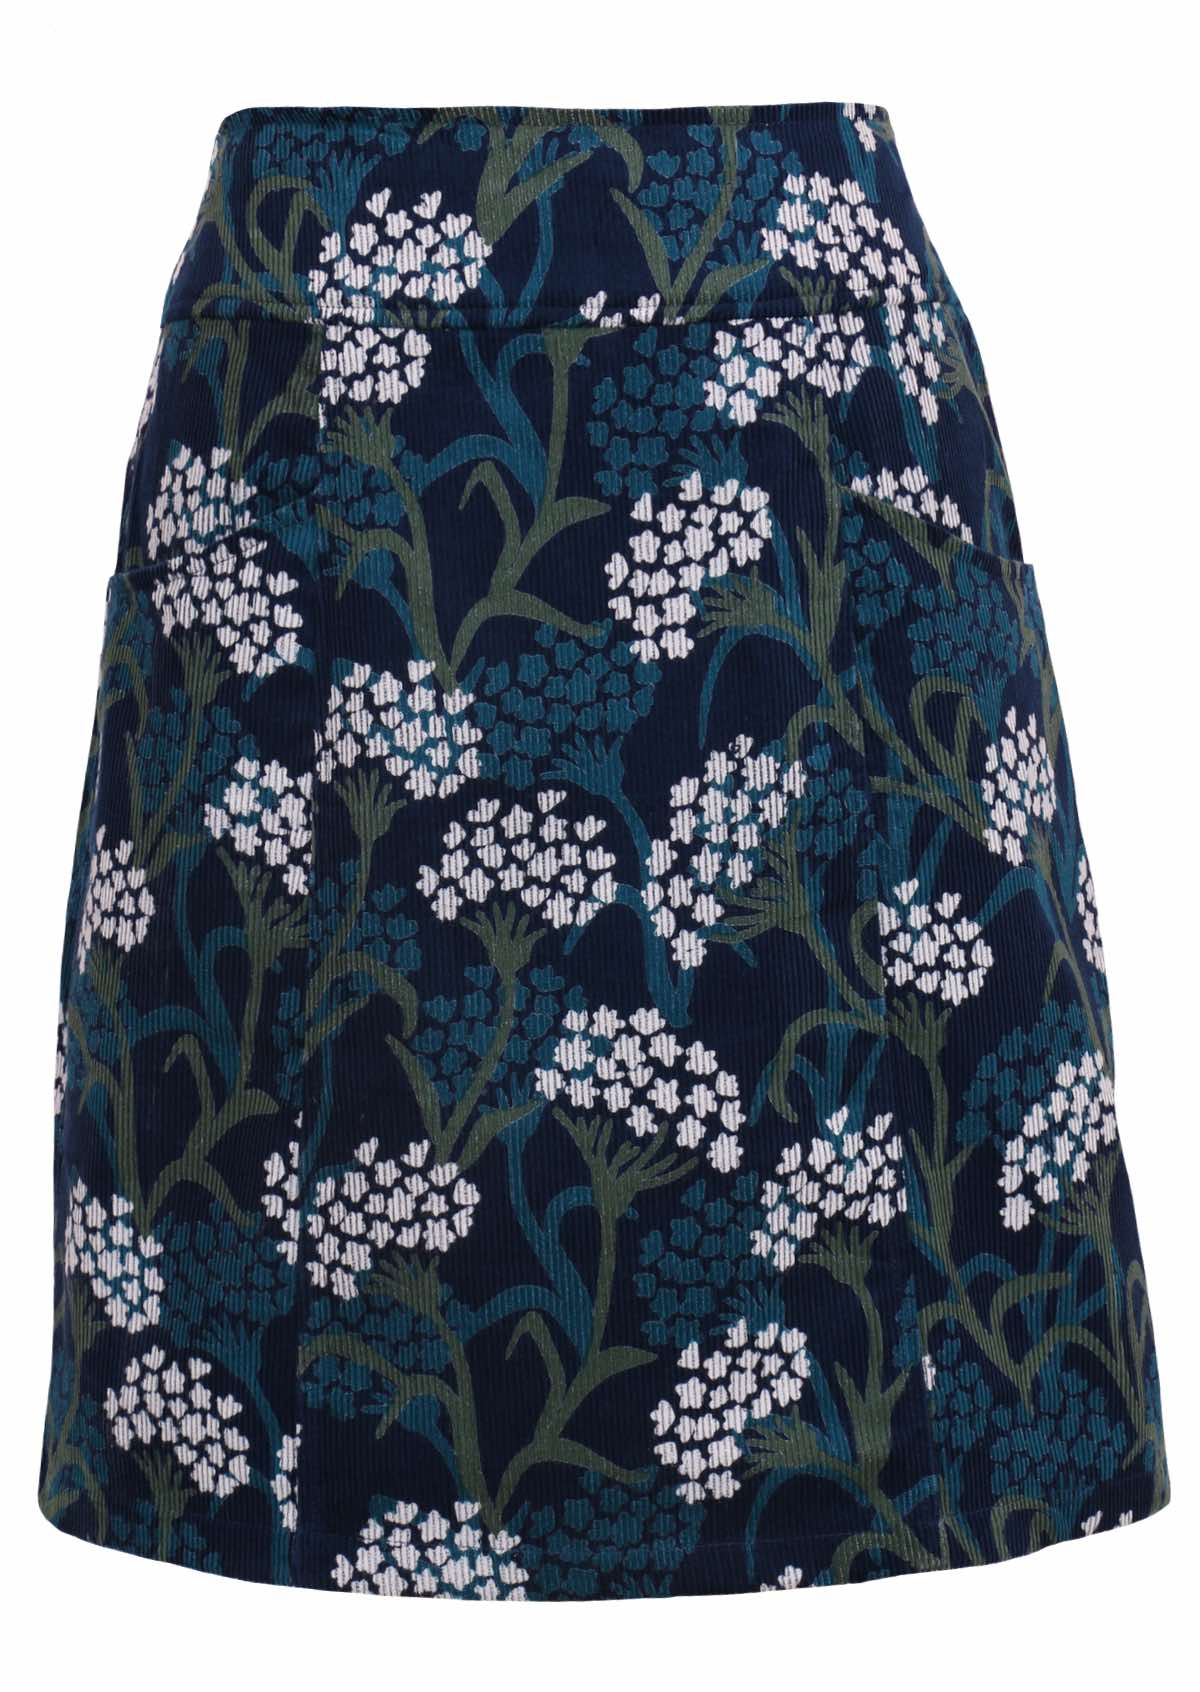 Mid length skirt features a yarrow flower print with white and green on a deep blue base.